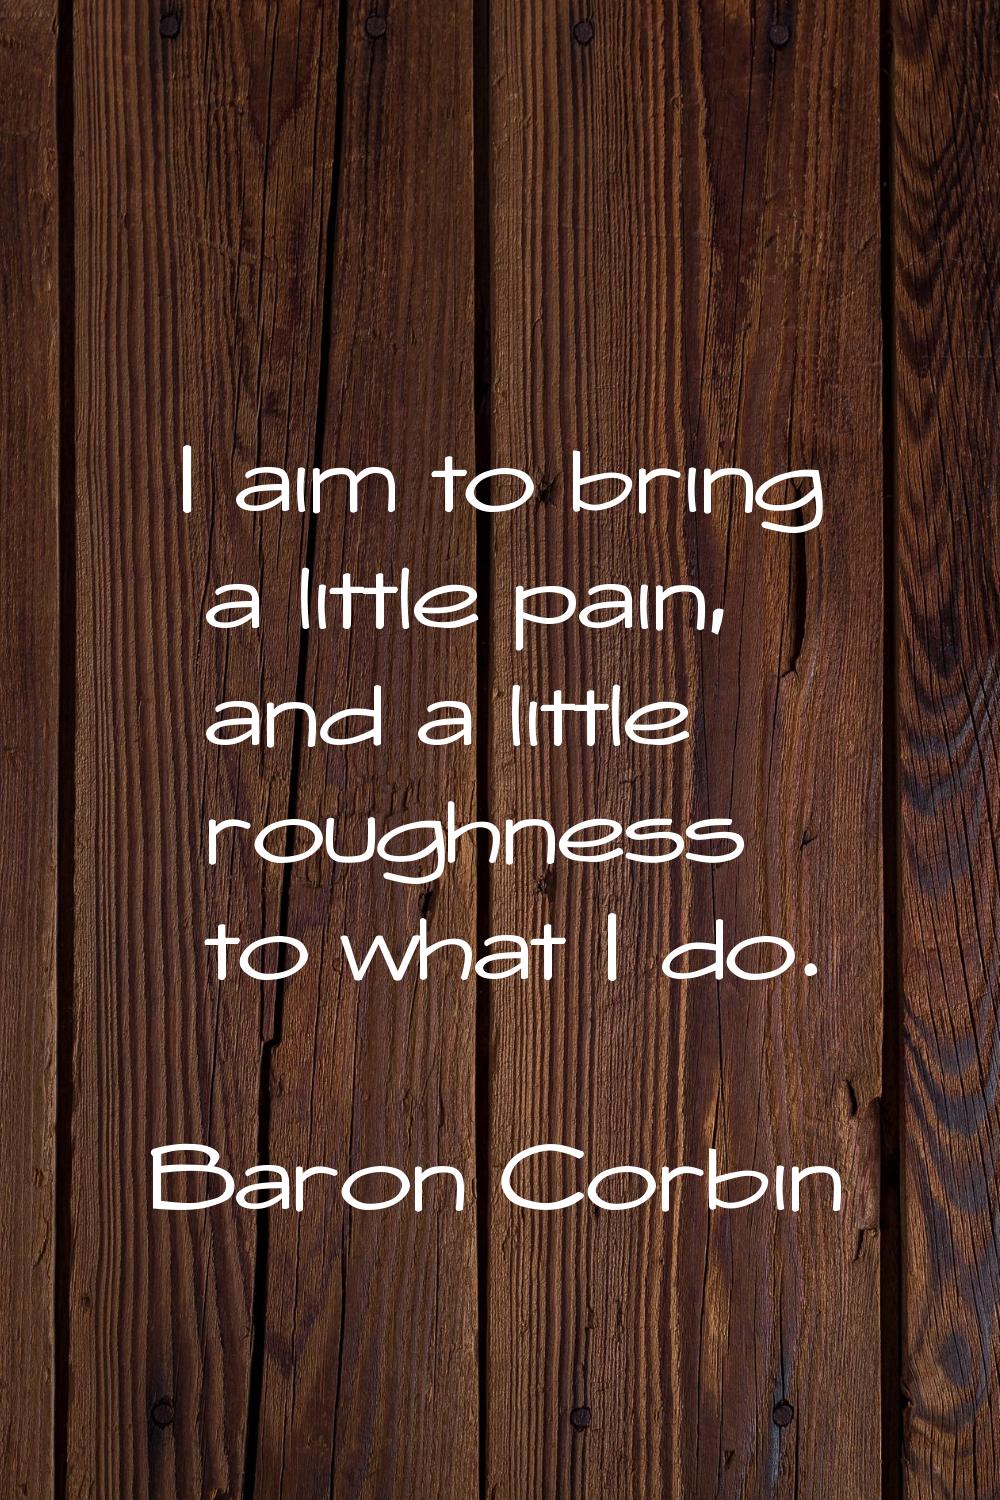 I aim to bring a little pain, and a little roughness to what I do.